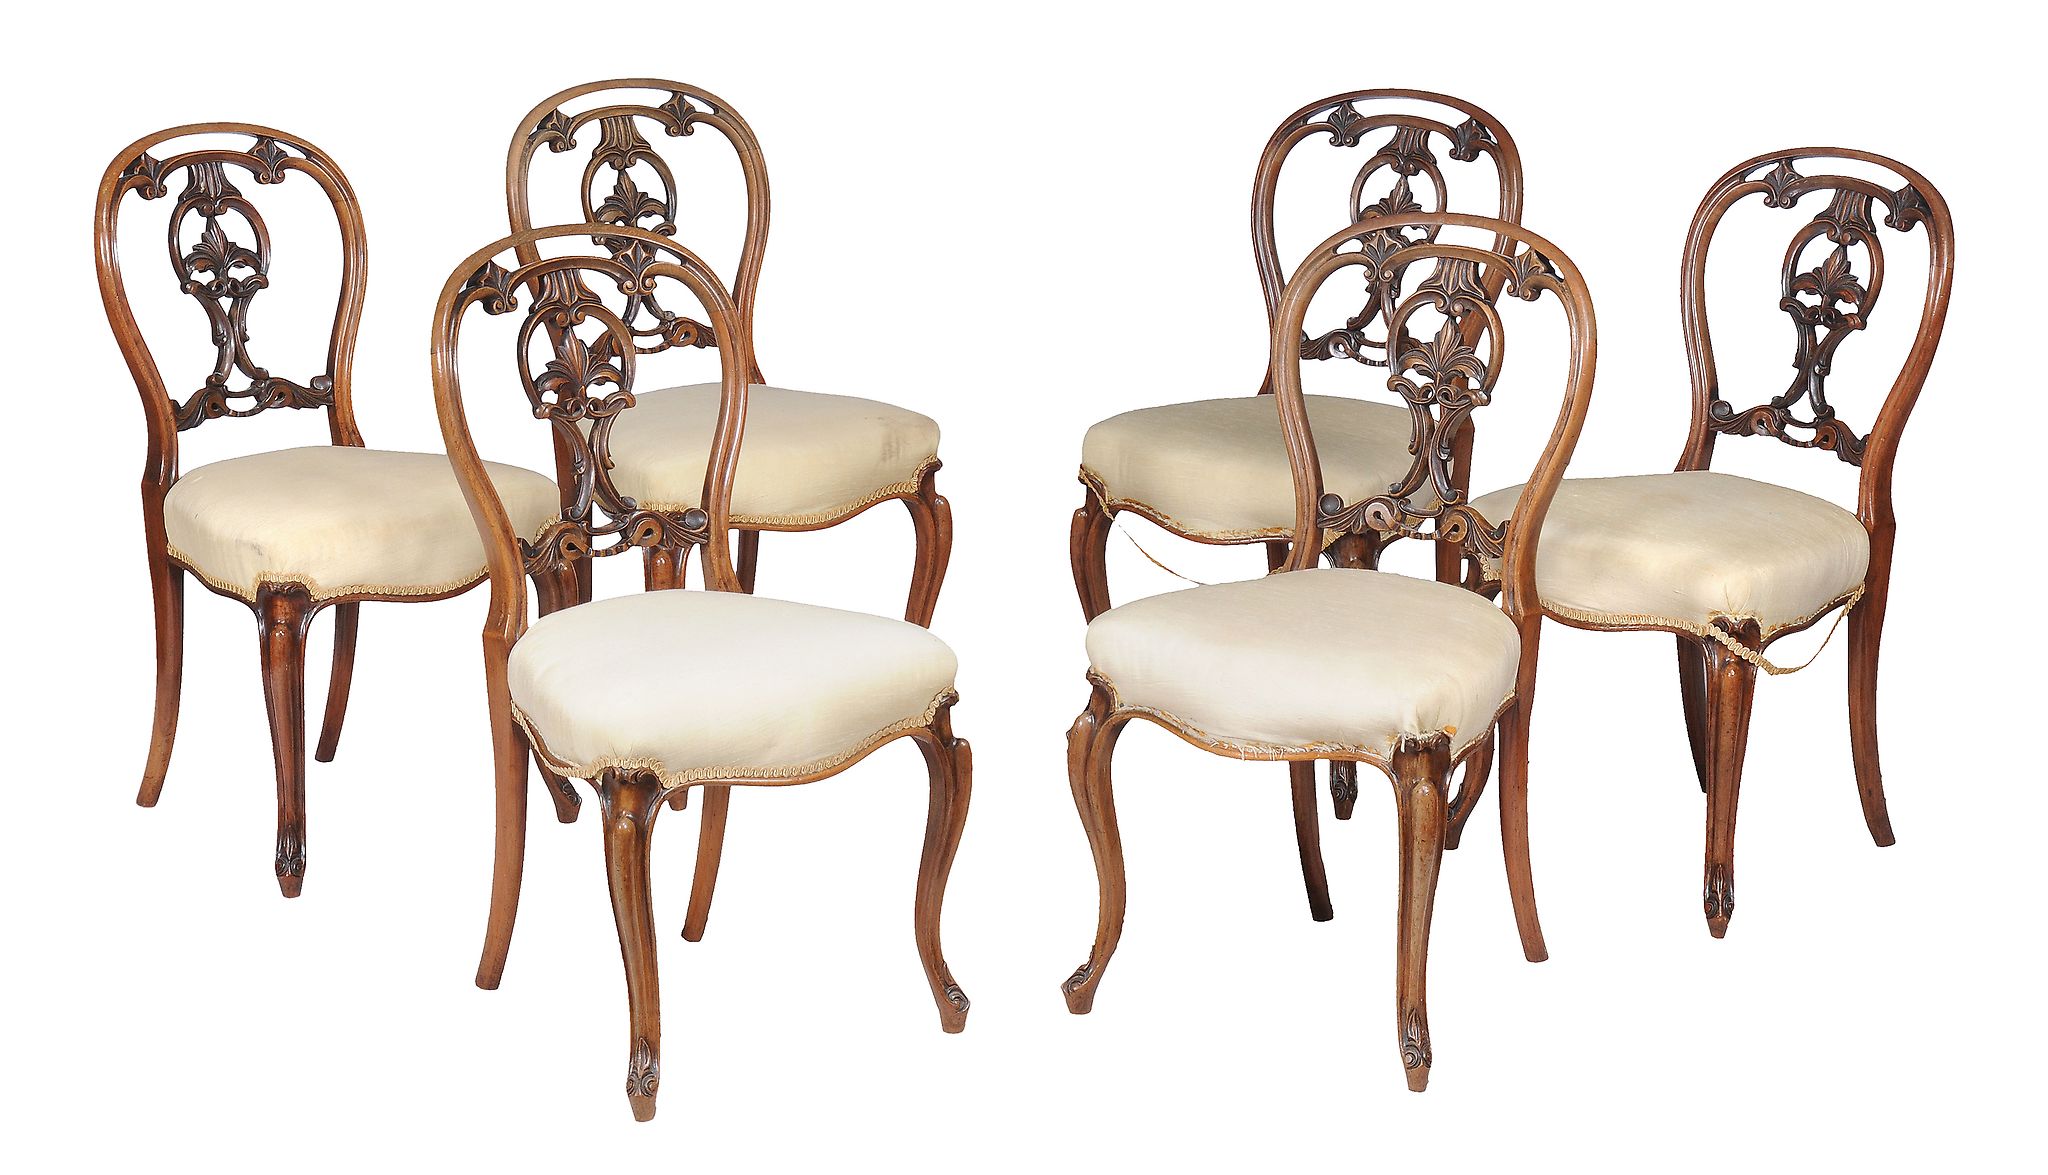 A set of six Victorian walnut dining chairs , circa 1870, each with decorative vertical splat